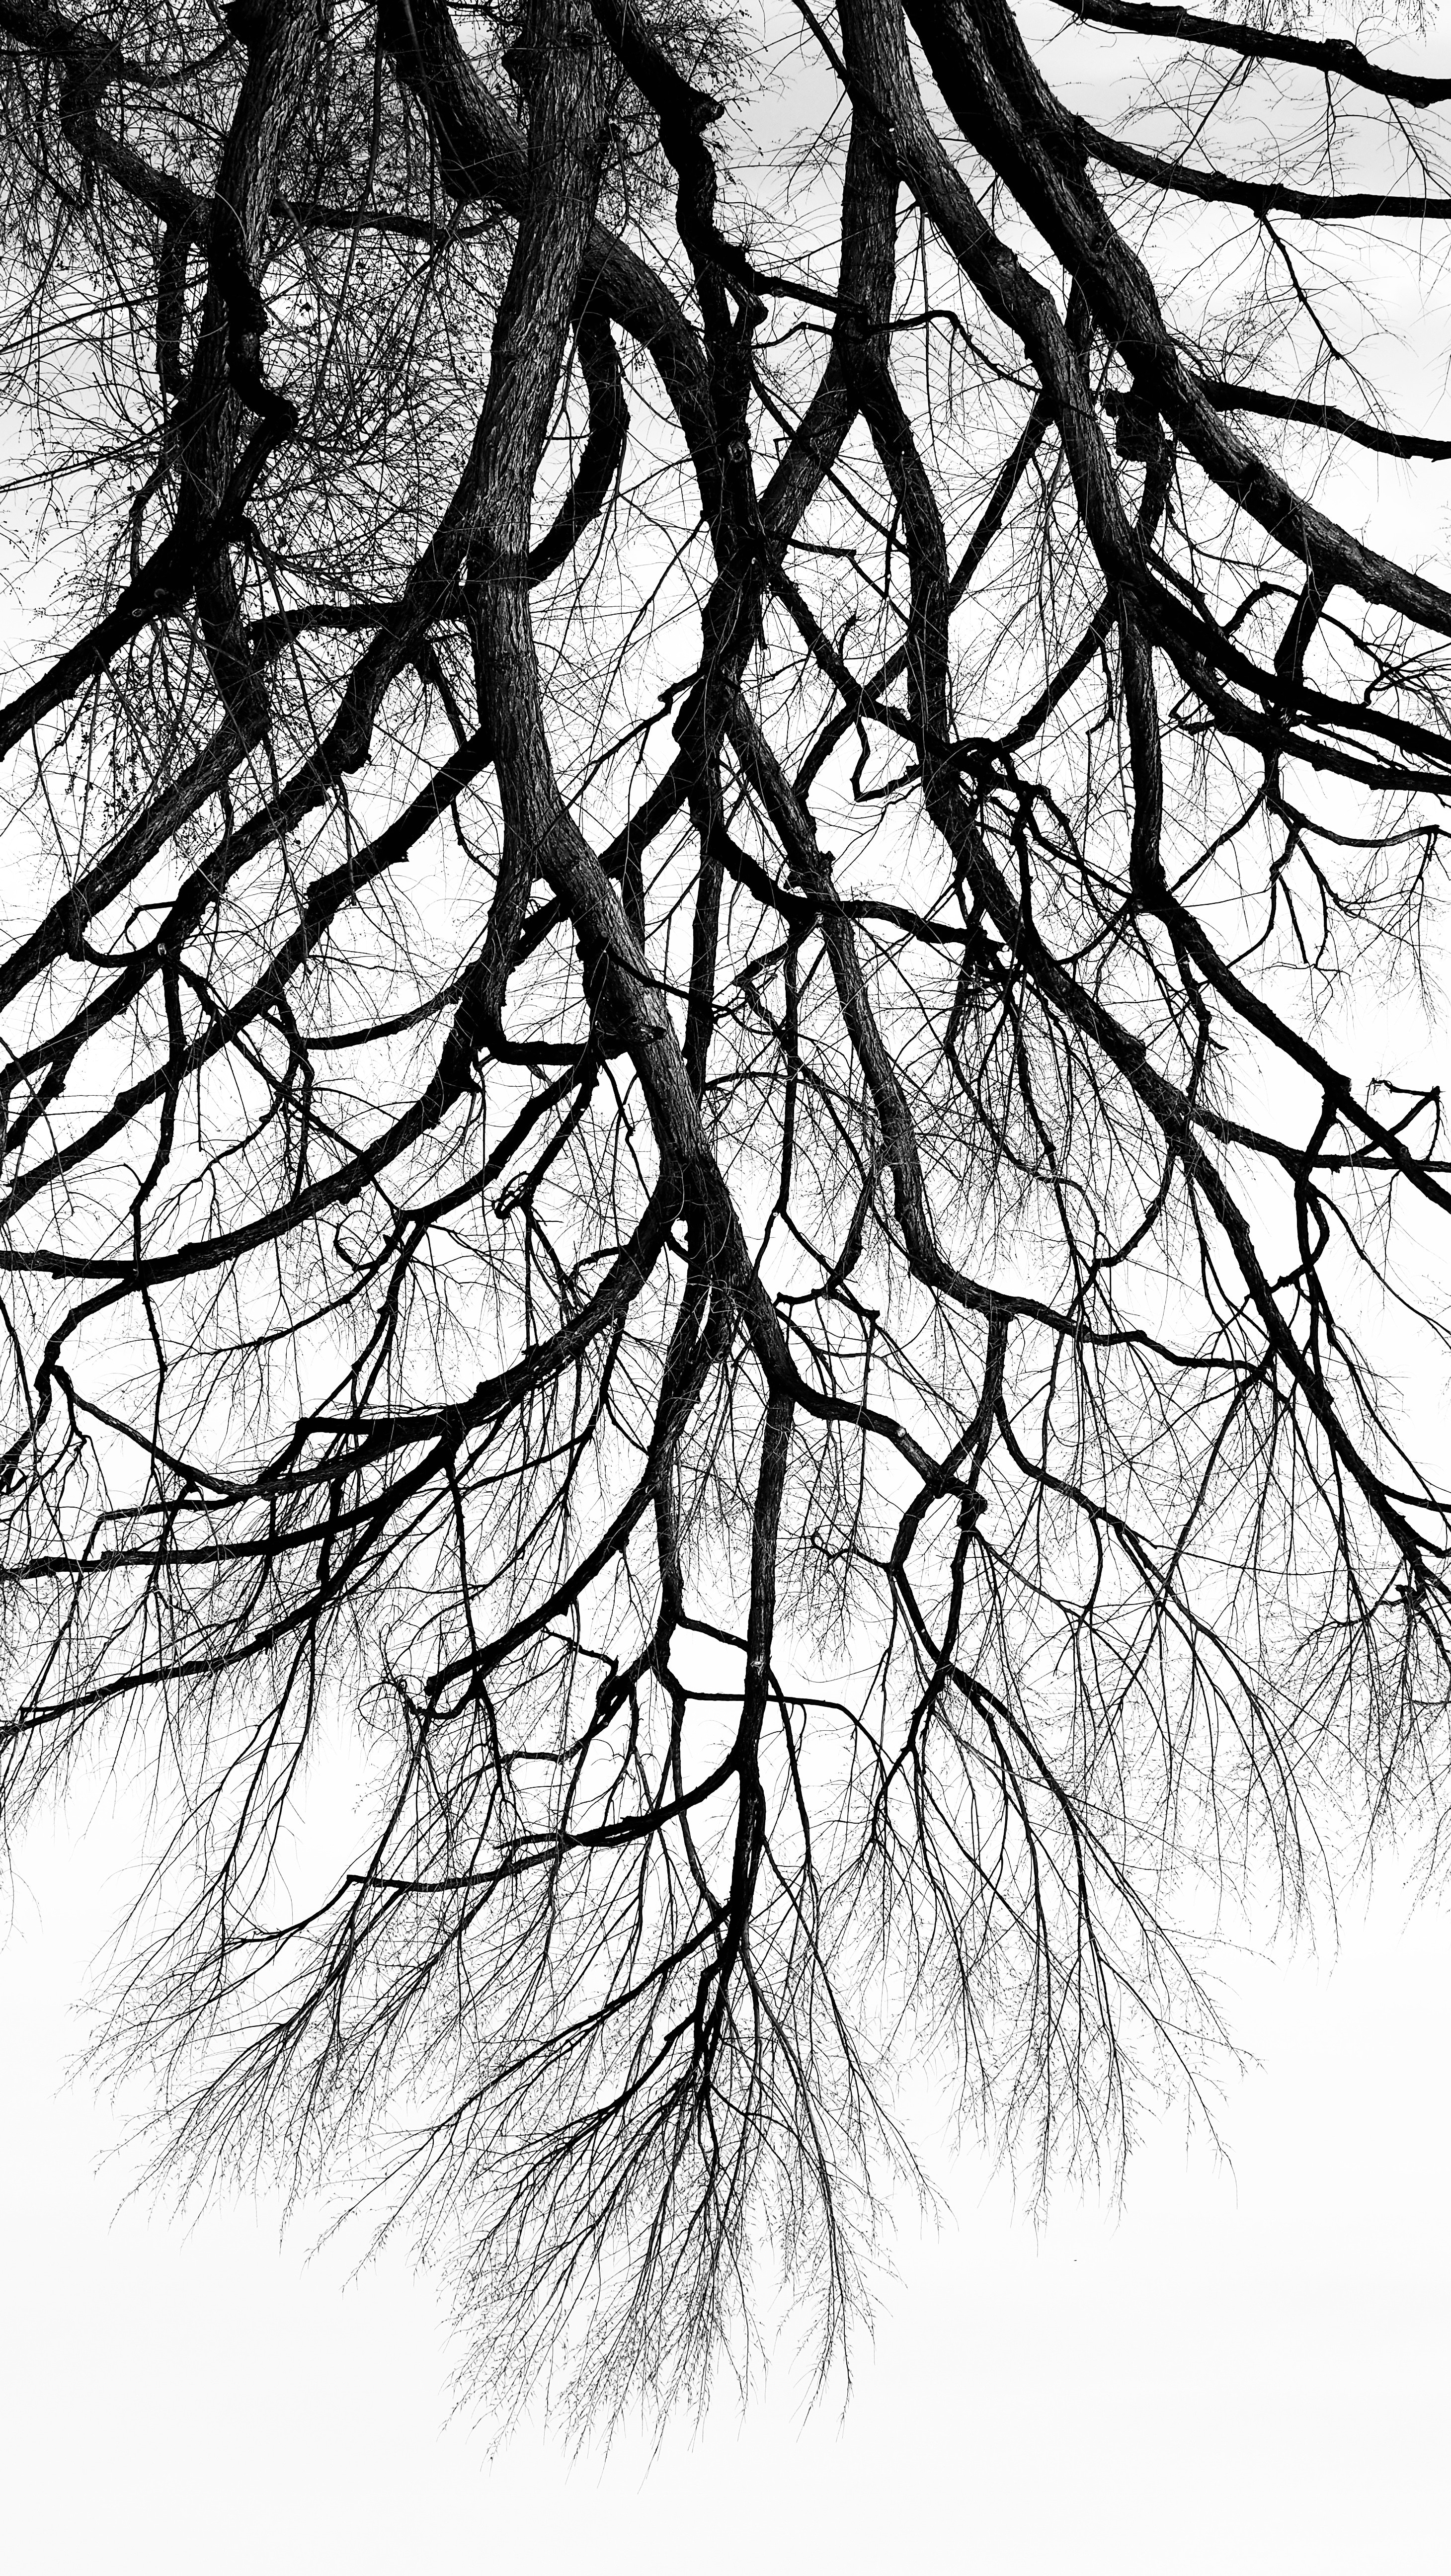 134181 download wallpaper nature, wood, tree, minimalism, branches, bw, chb screensavers and pictures for free